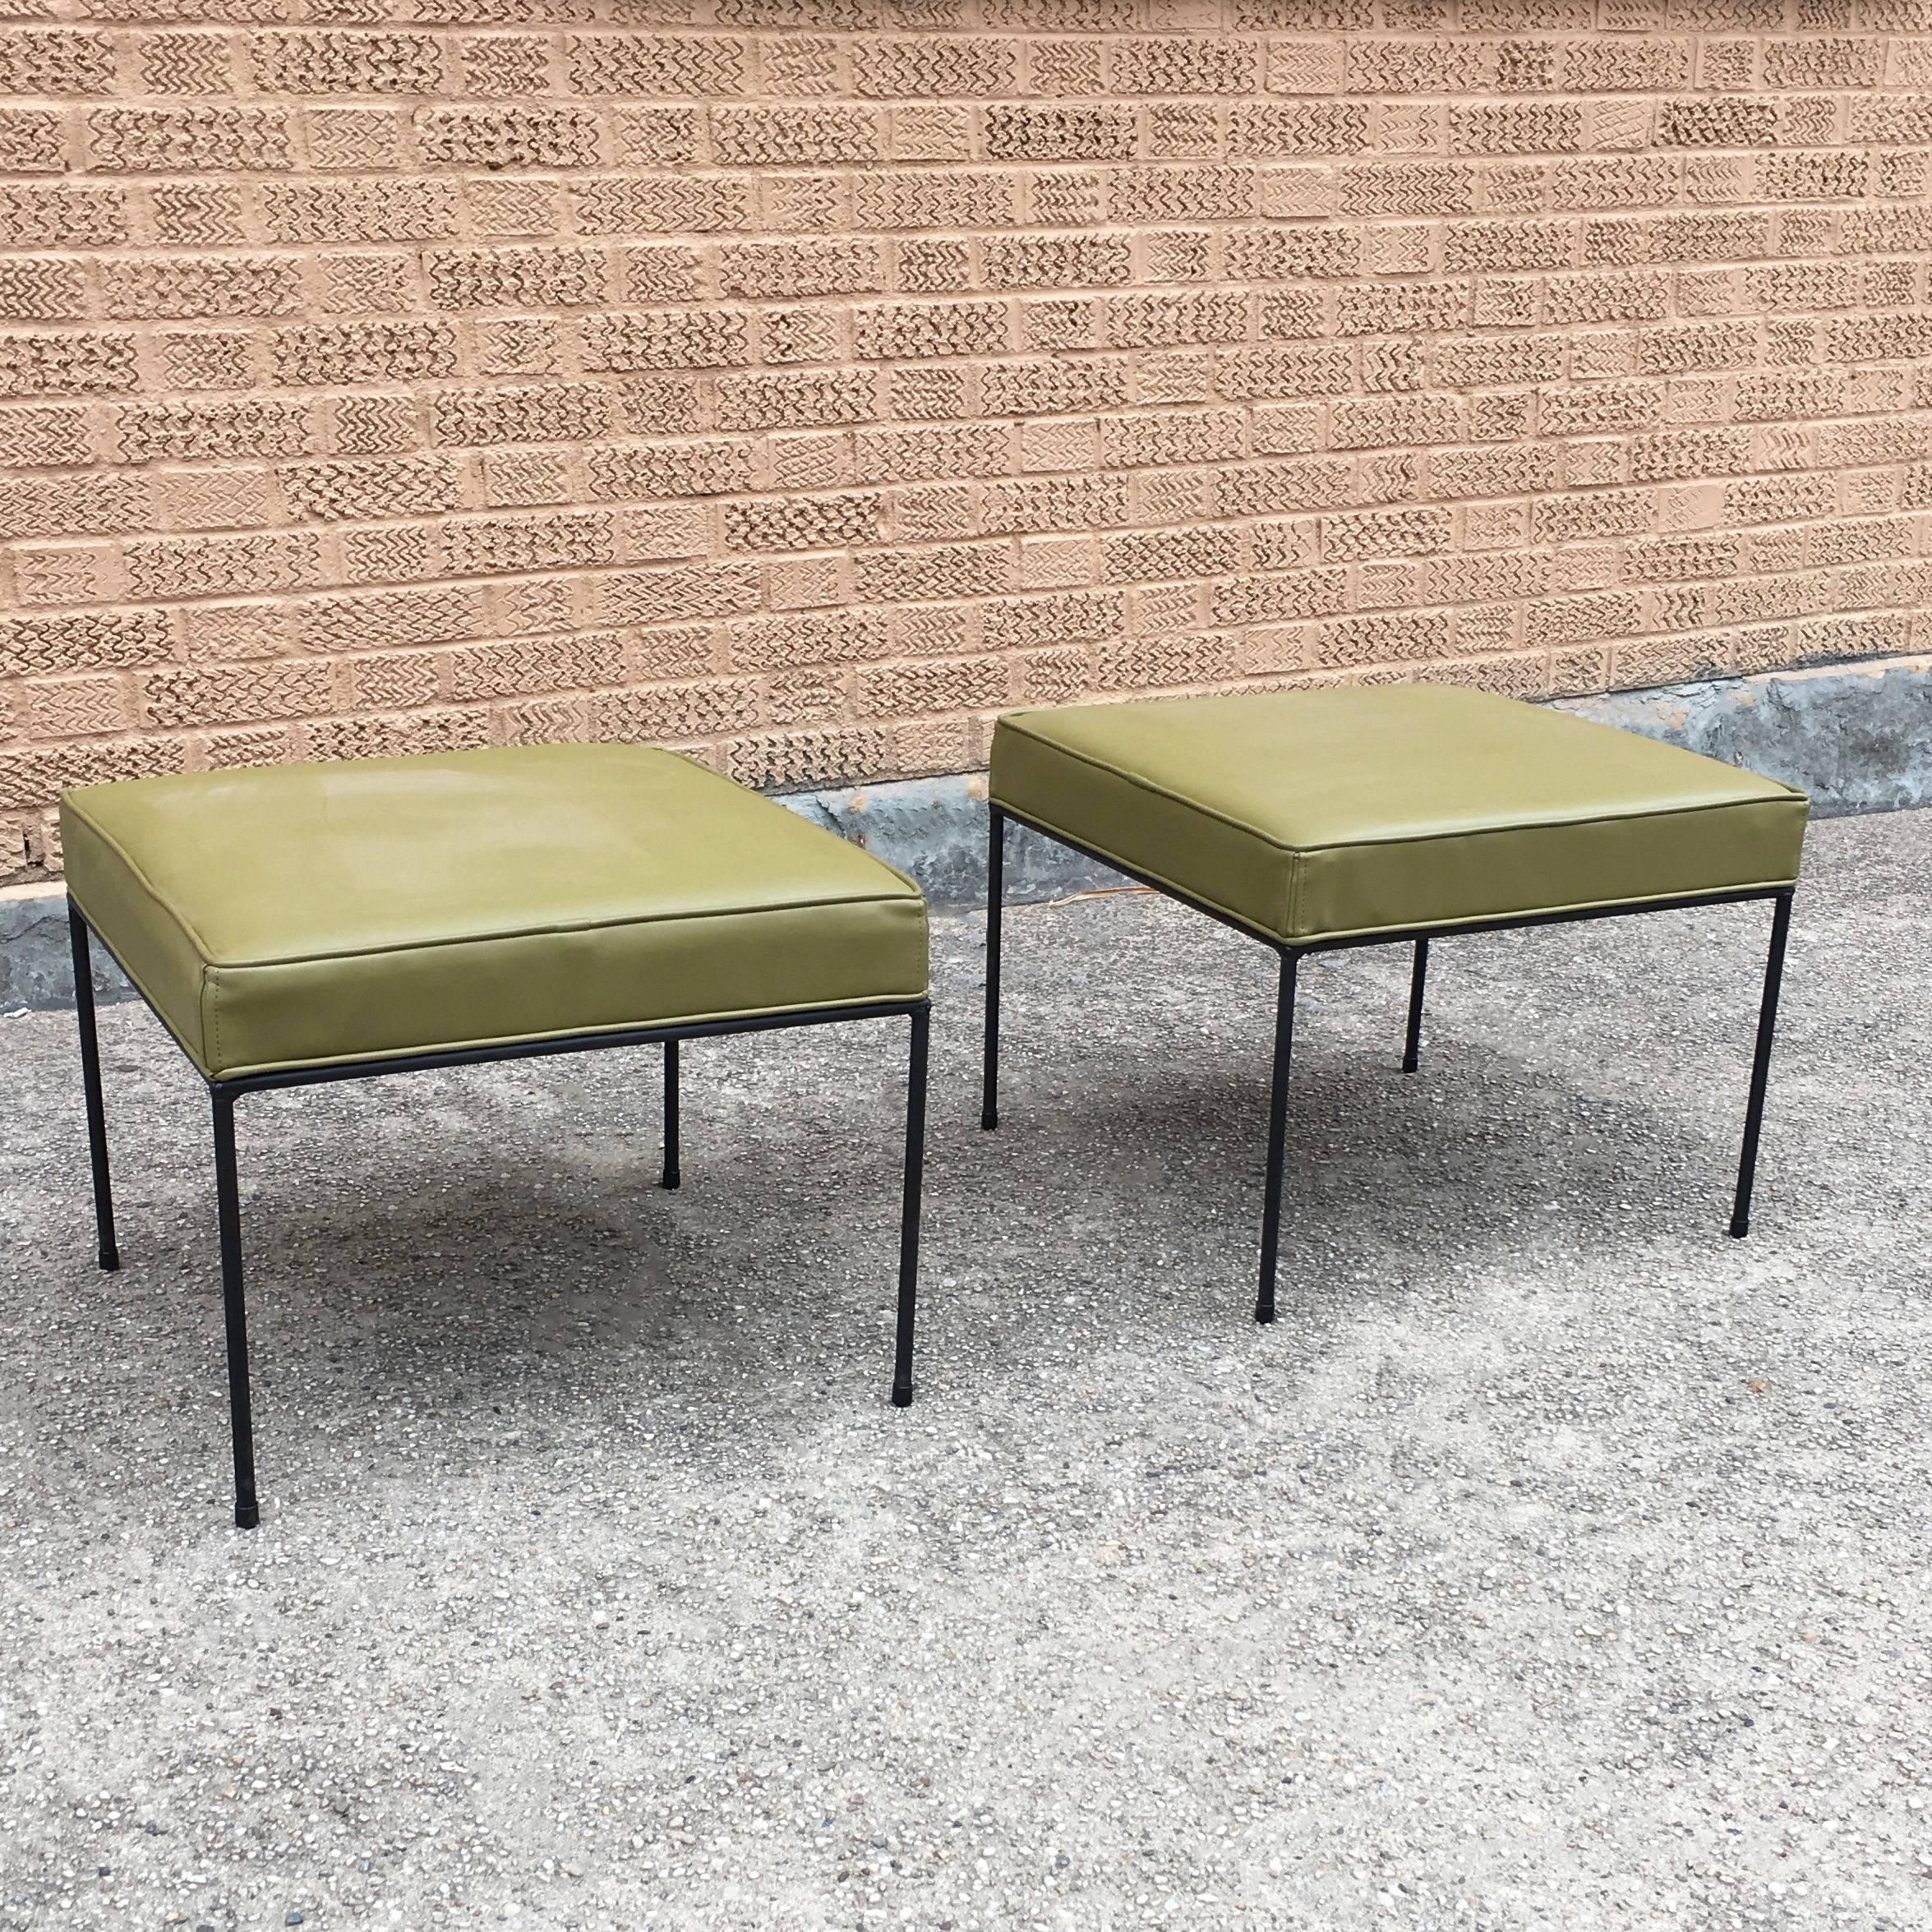 Pair of Mid-Century Modern, low-profile, ottomans or benches by Paul McCobb feature square wrought iron frames and newly upholstered olive green vinyl seats.